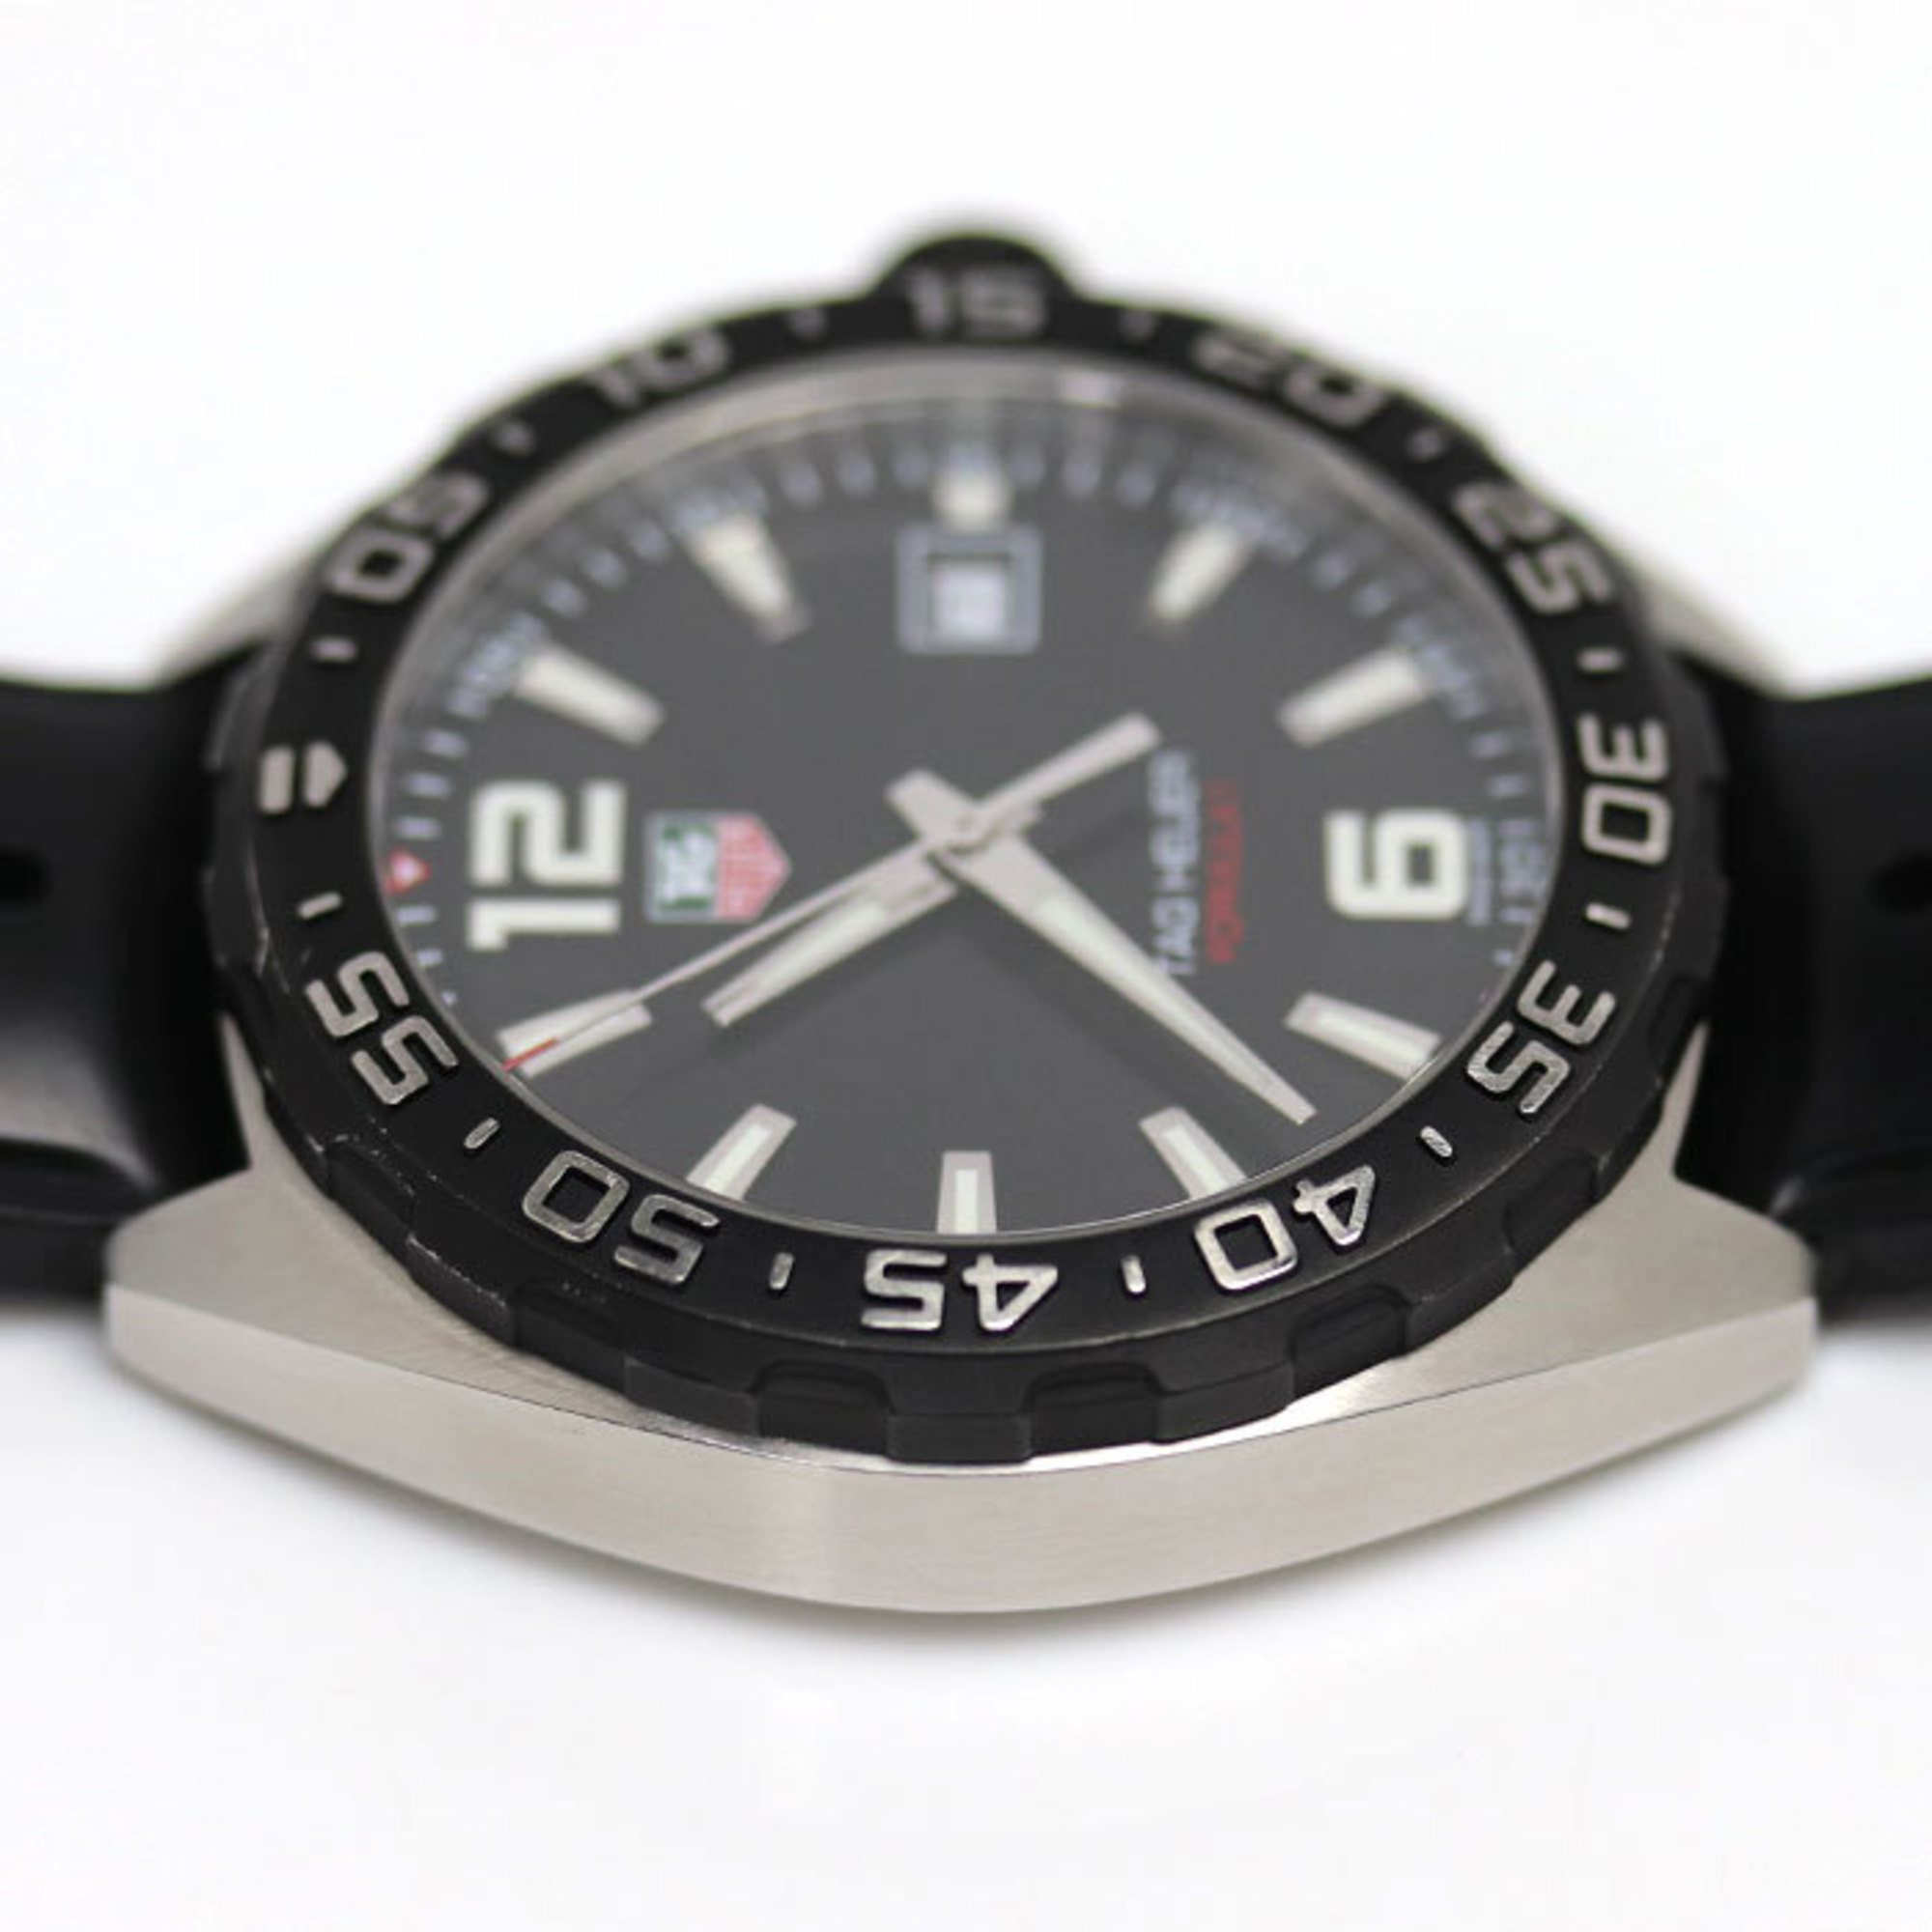 TAG HEUER Formula 1 watch battery operated WAZ1110.FT8023